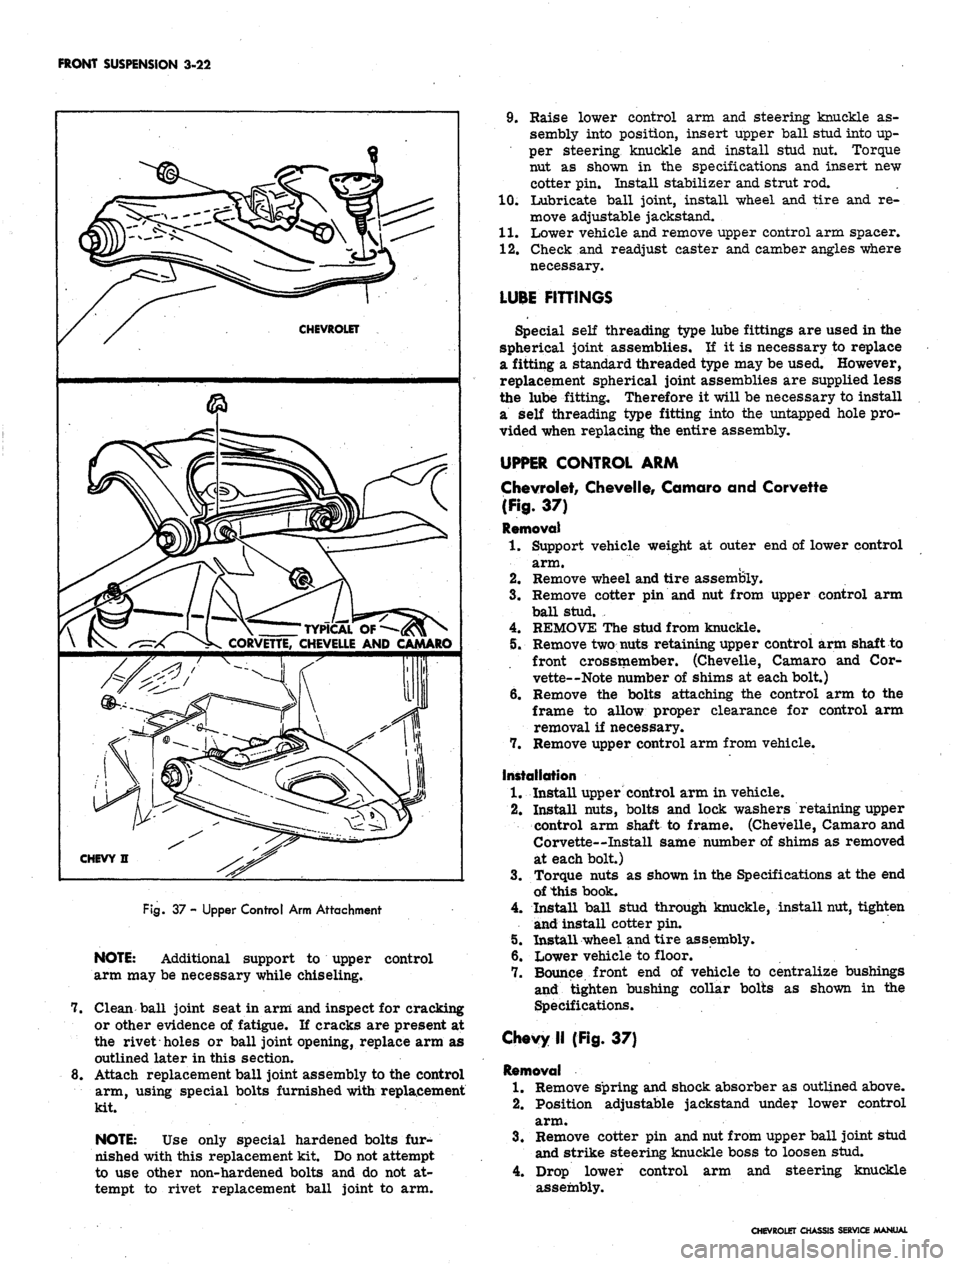 CHEVROLET CAMARO 1967 1.G Chassis Workshop Manual 
FRONT SUSPENSION
 3-22

CHEVROLET

s-L 1 \
 TYPICAL
 OF

-^-x ^K CORVETTE, CHEVELLE AND CAMARO

CHEVY n

Rg.
 37 - Upper Control Arm Attachment

NOTE:
 Additional support to upper control

arm may be